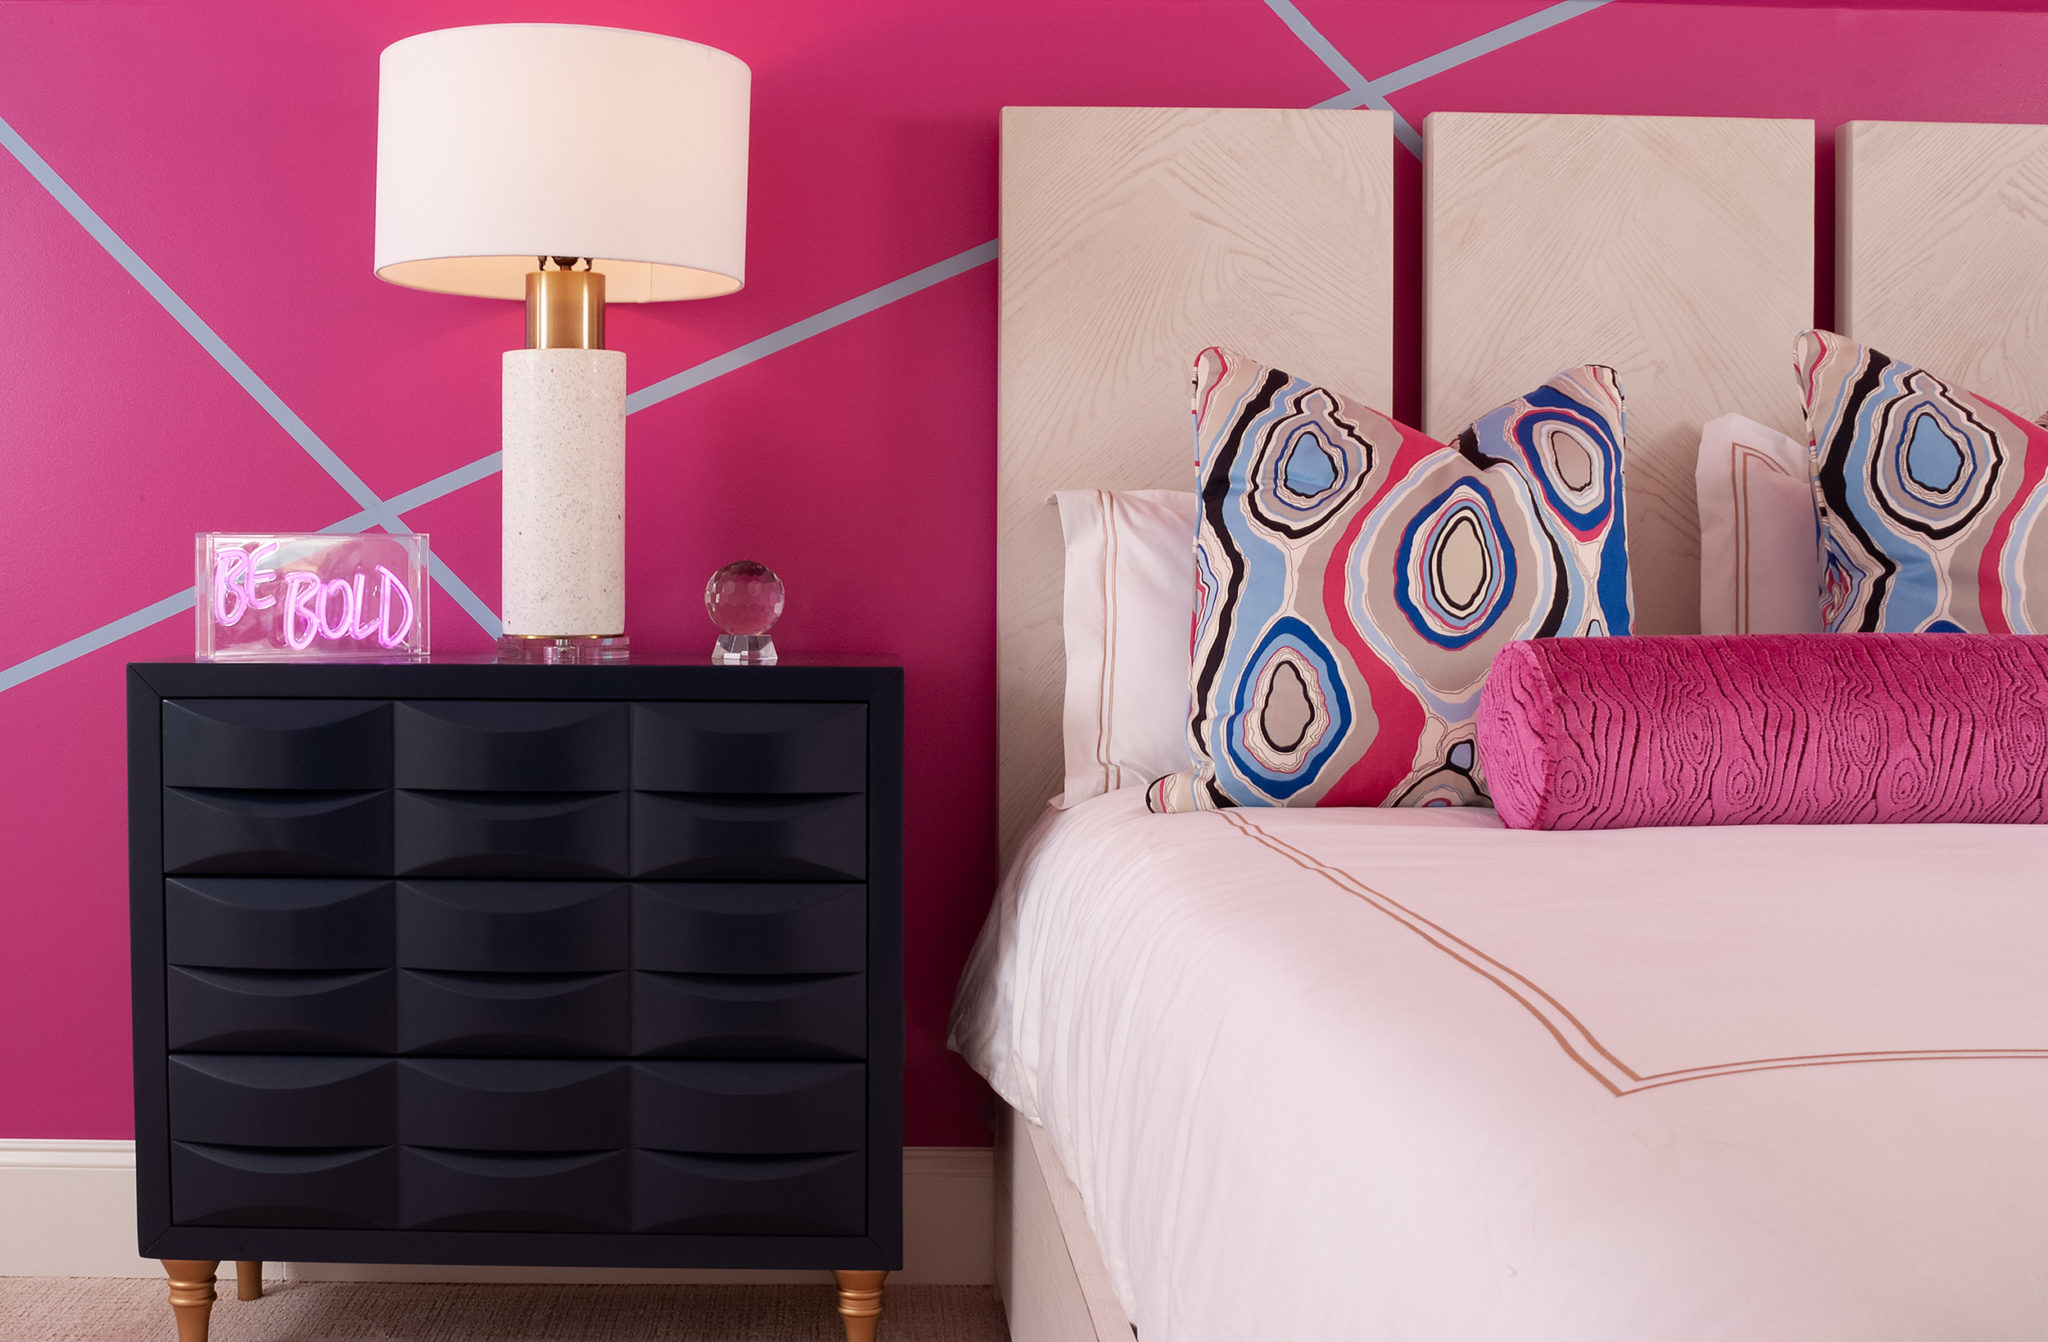 10 ways to add more pink in your home